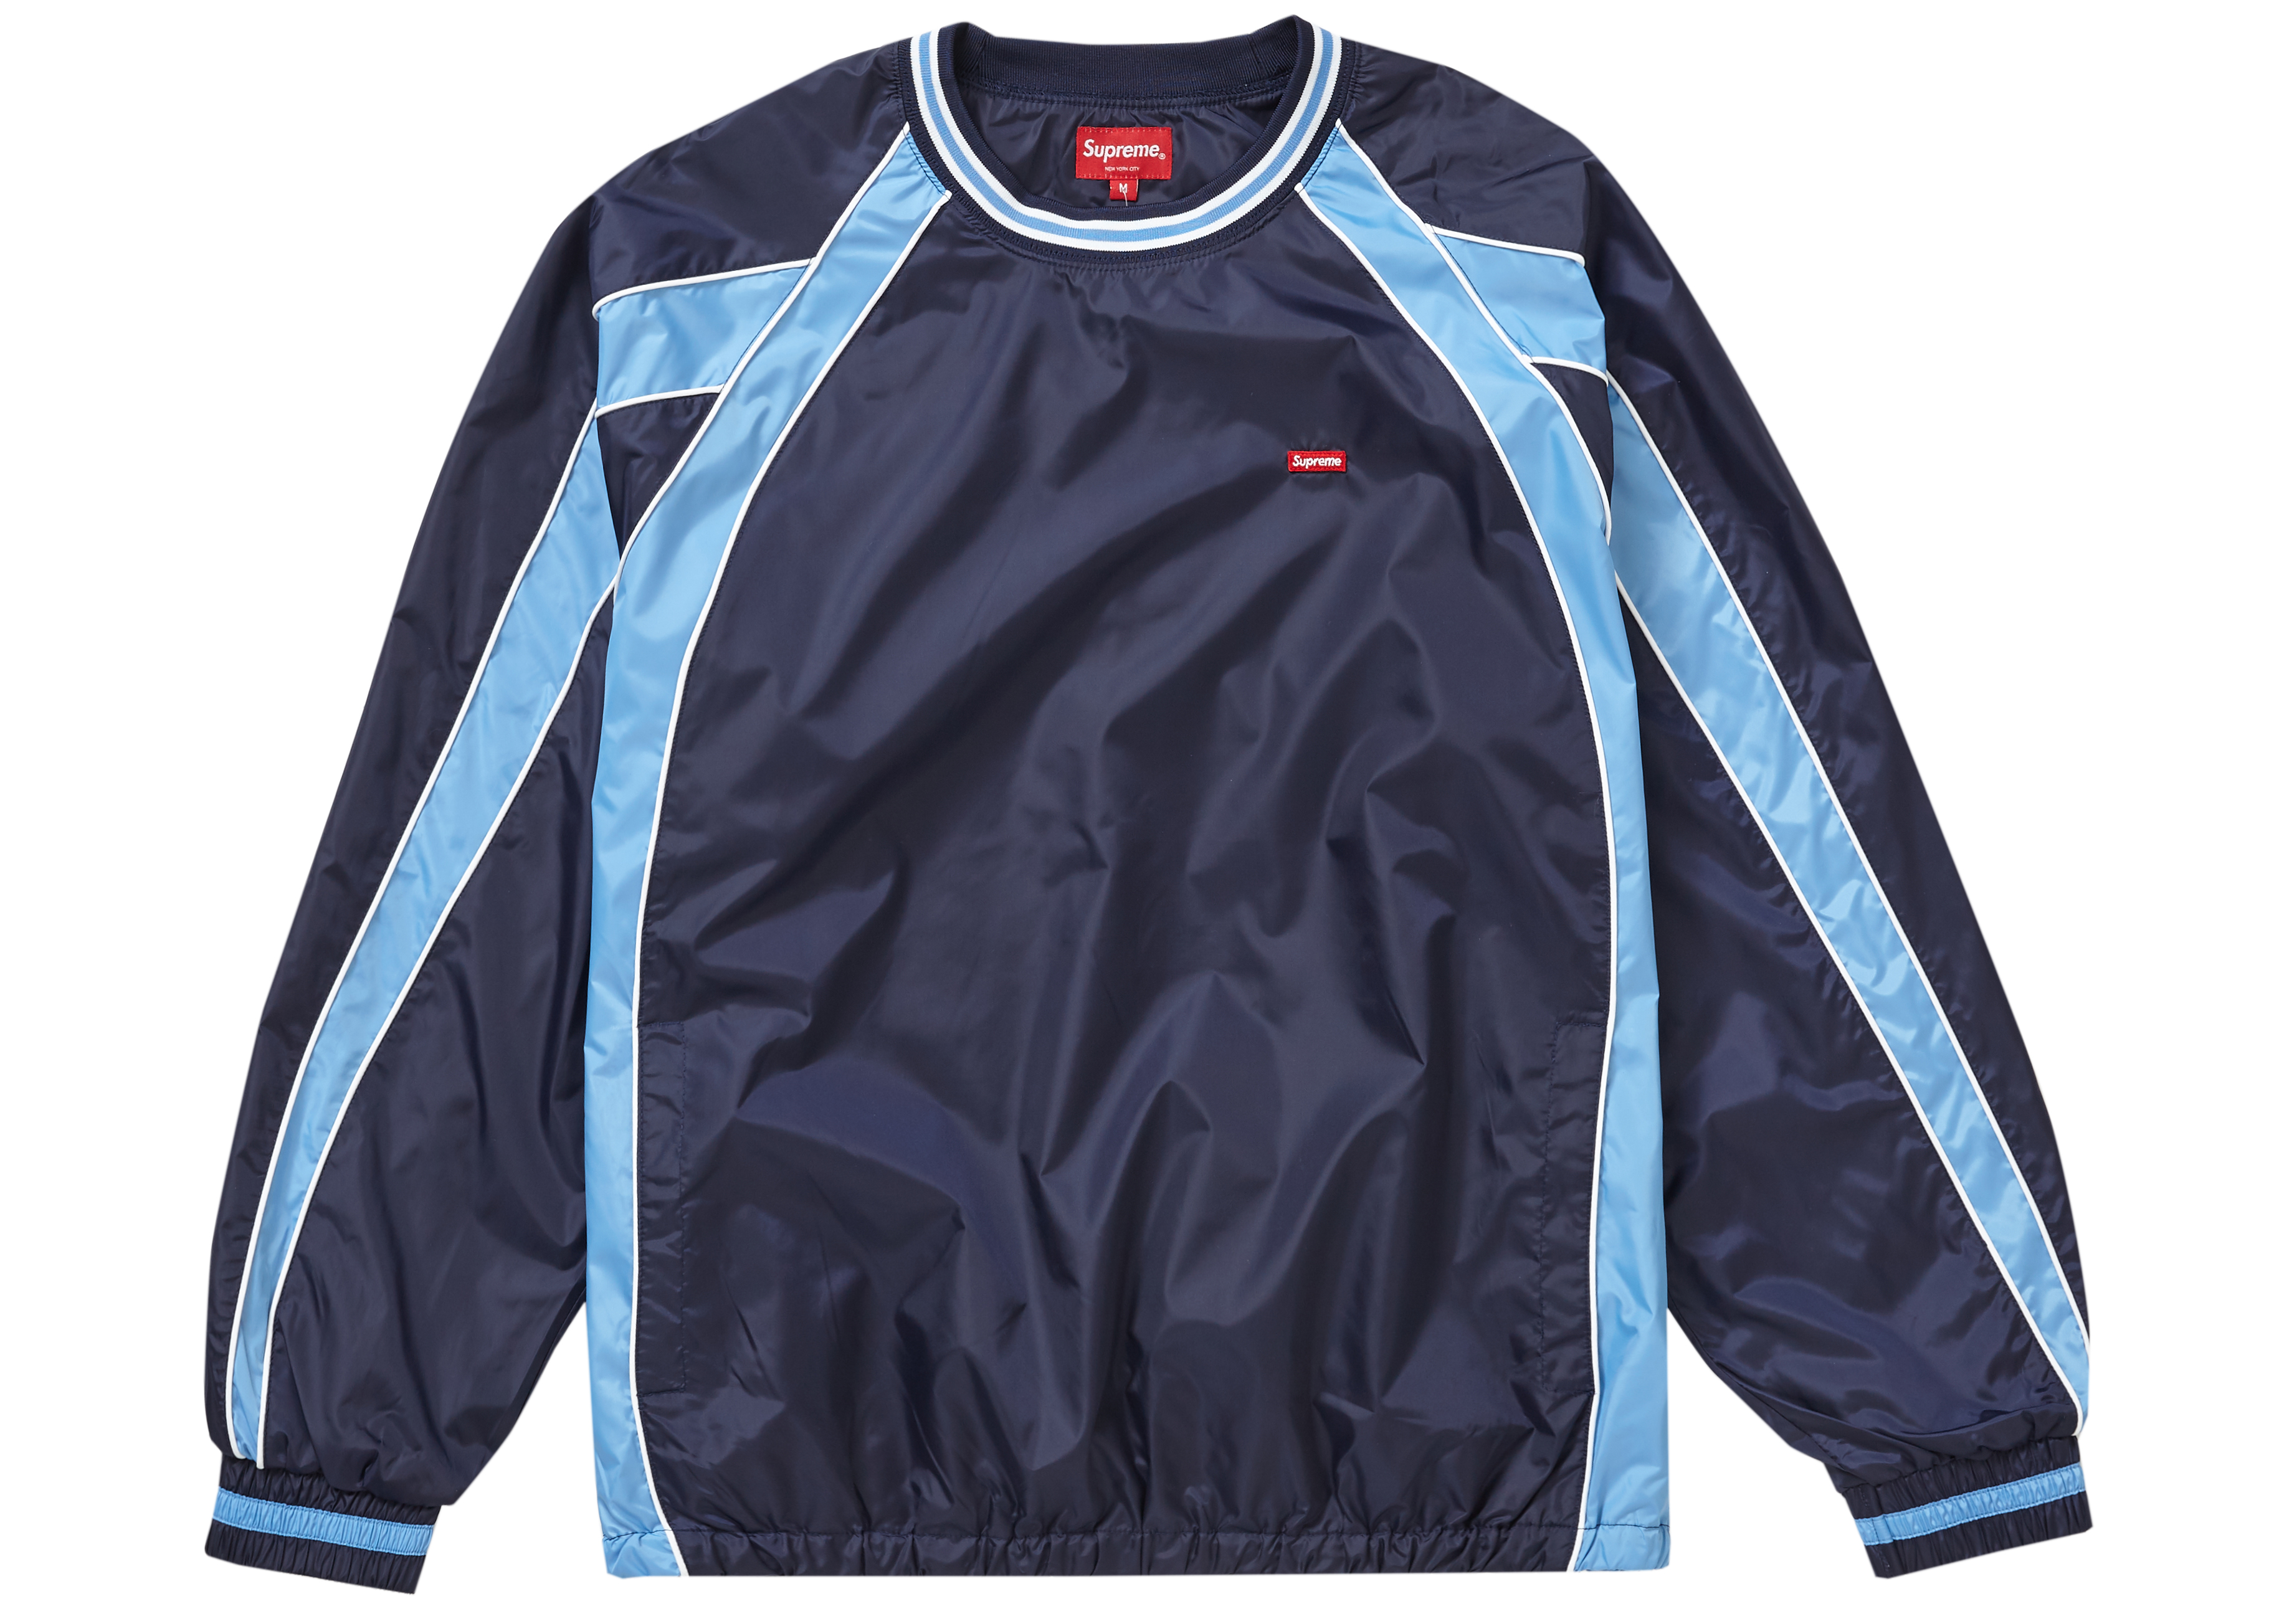 Supreme Piping Warm Up Pullover www.krzysztofbialy.com